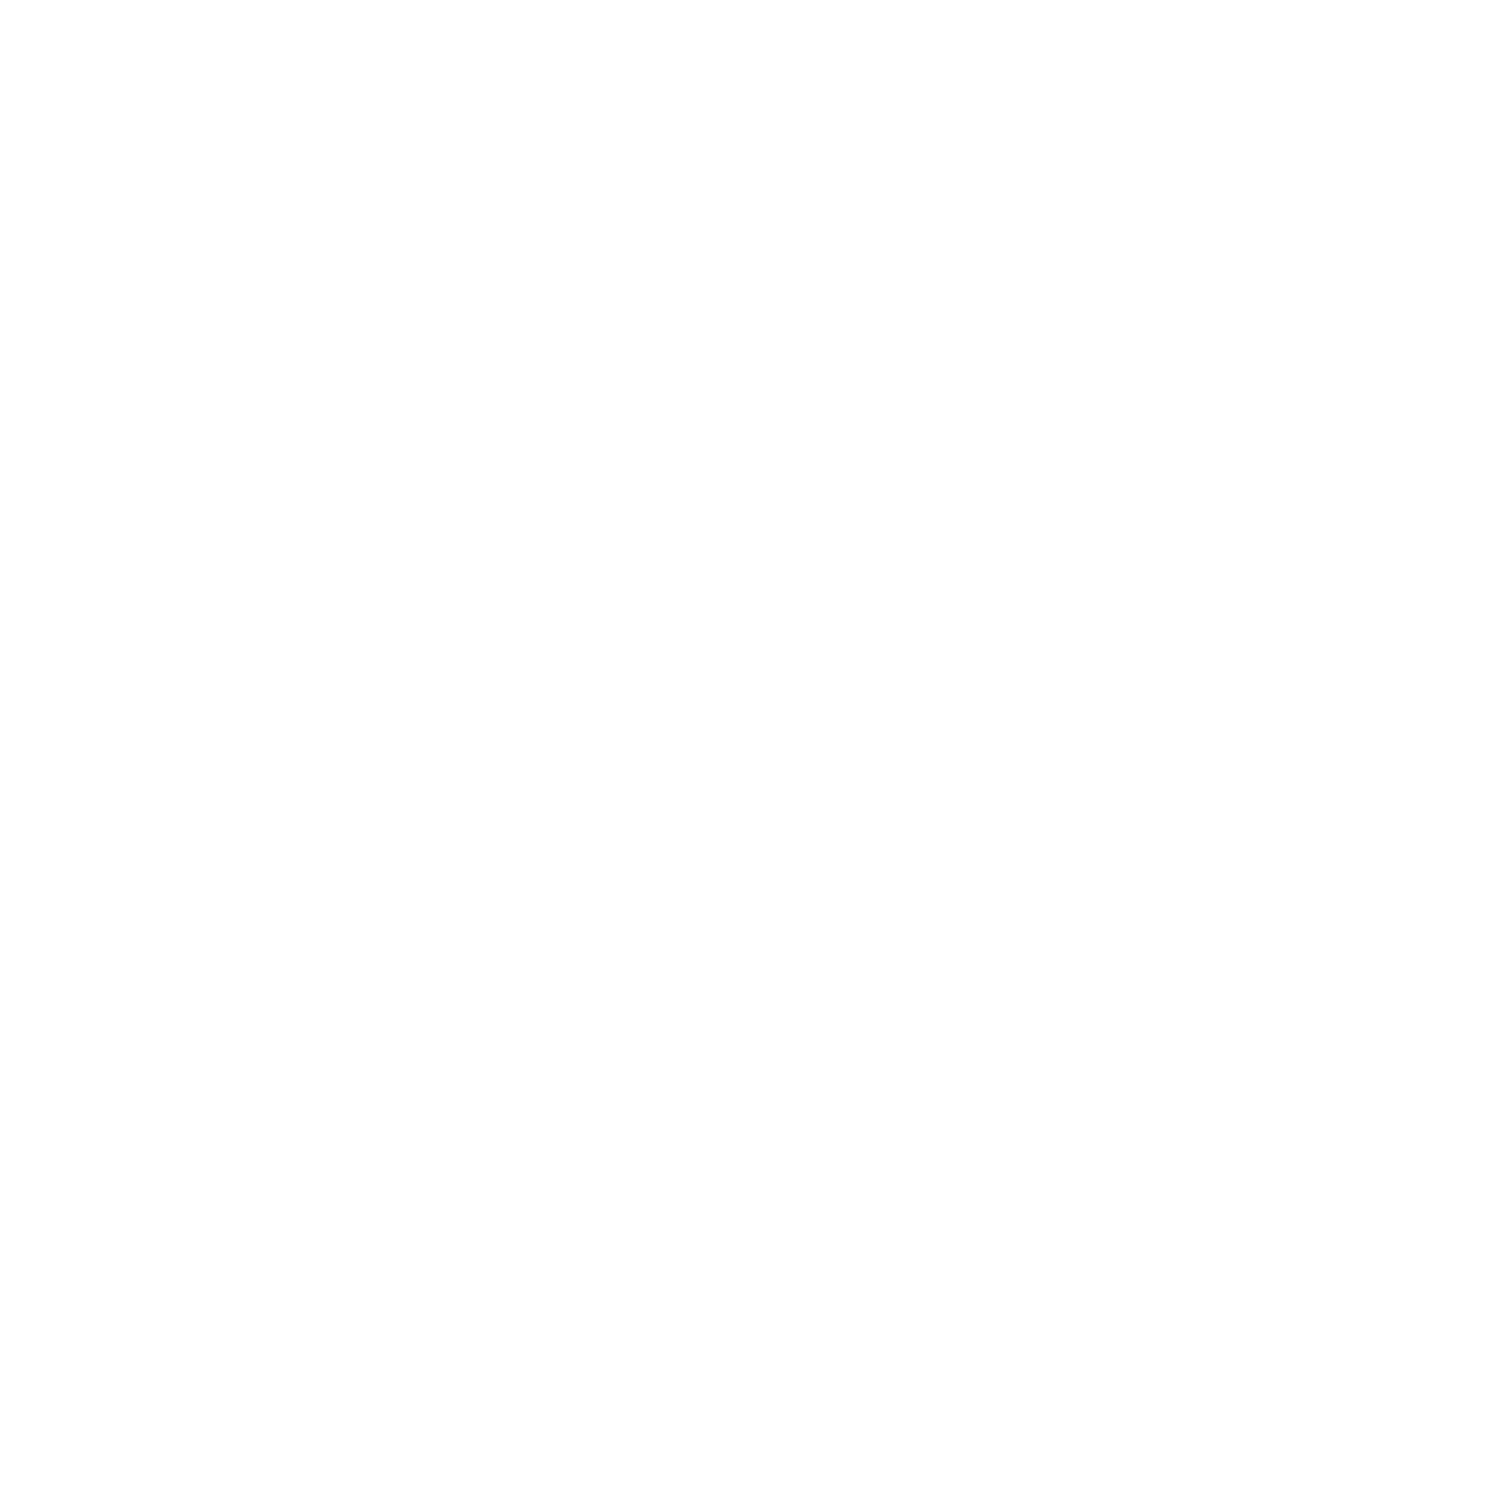 Olives Expo